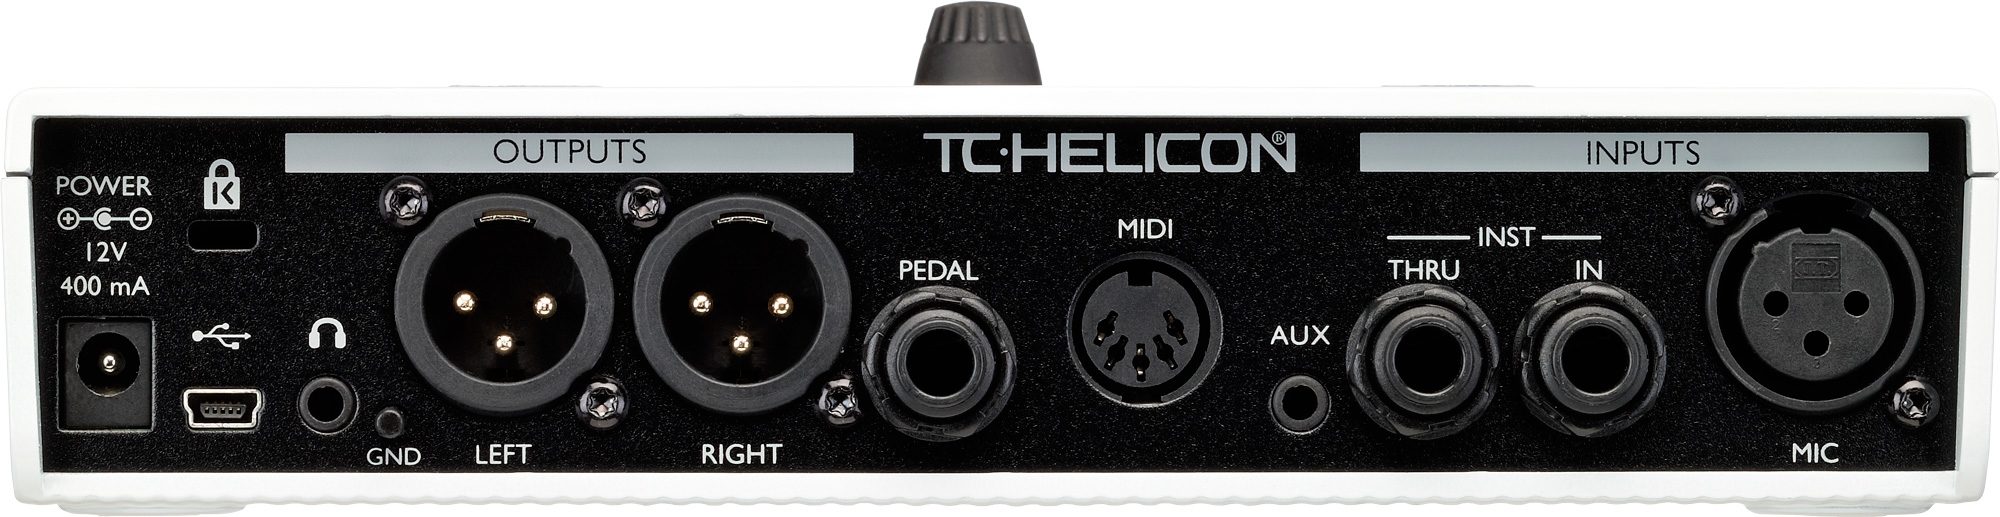 TC-Helicon VoiceLive Play GTX Guitar Vocal Effects and Harmony Pedal